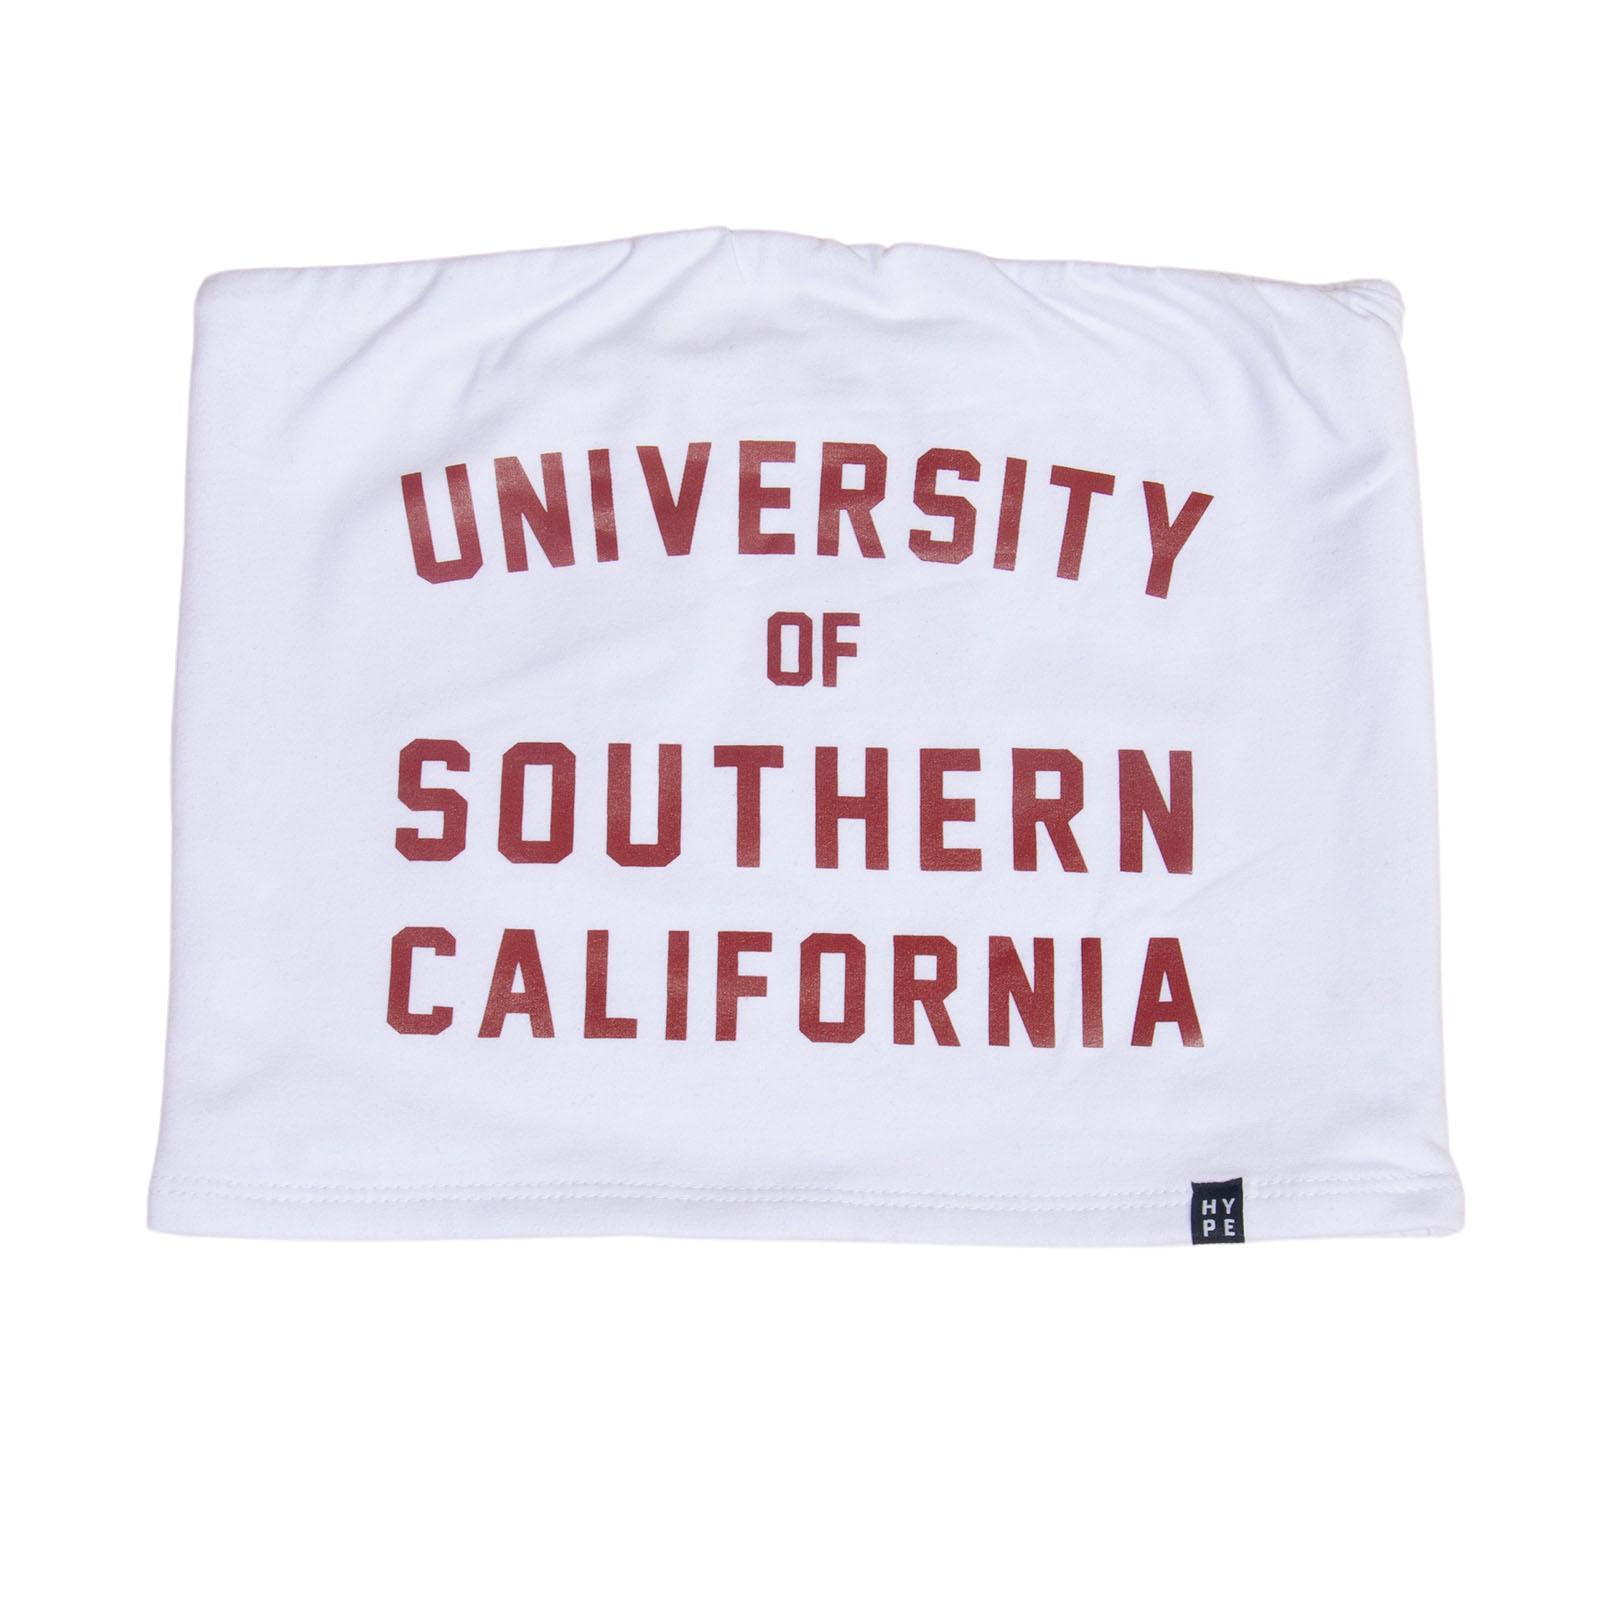 Univ of So Cal Fight On! Womens Tube Top image01